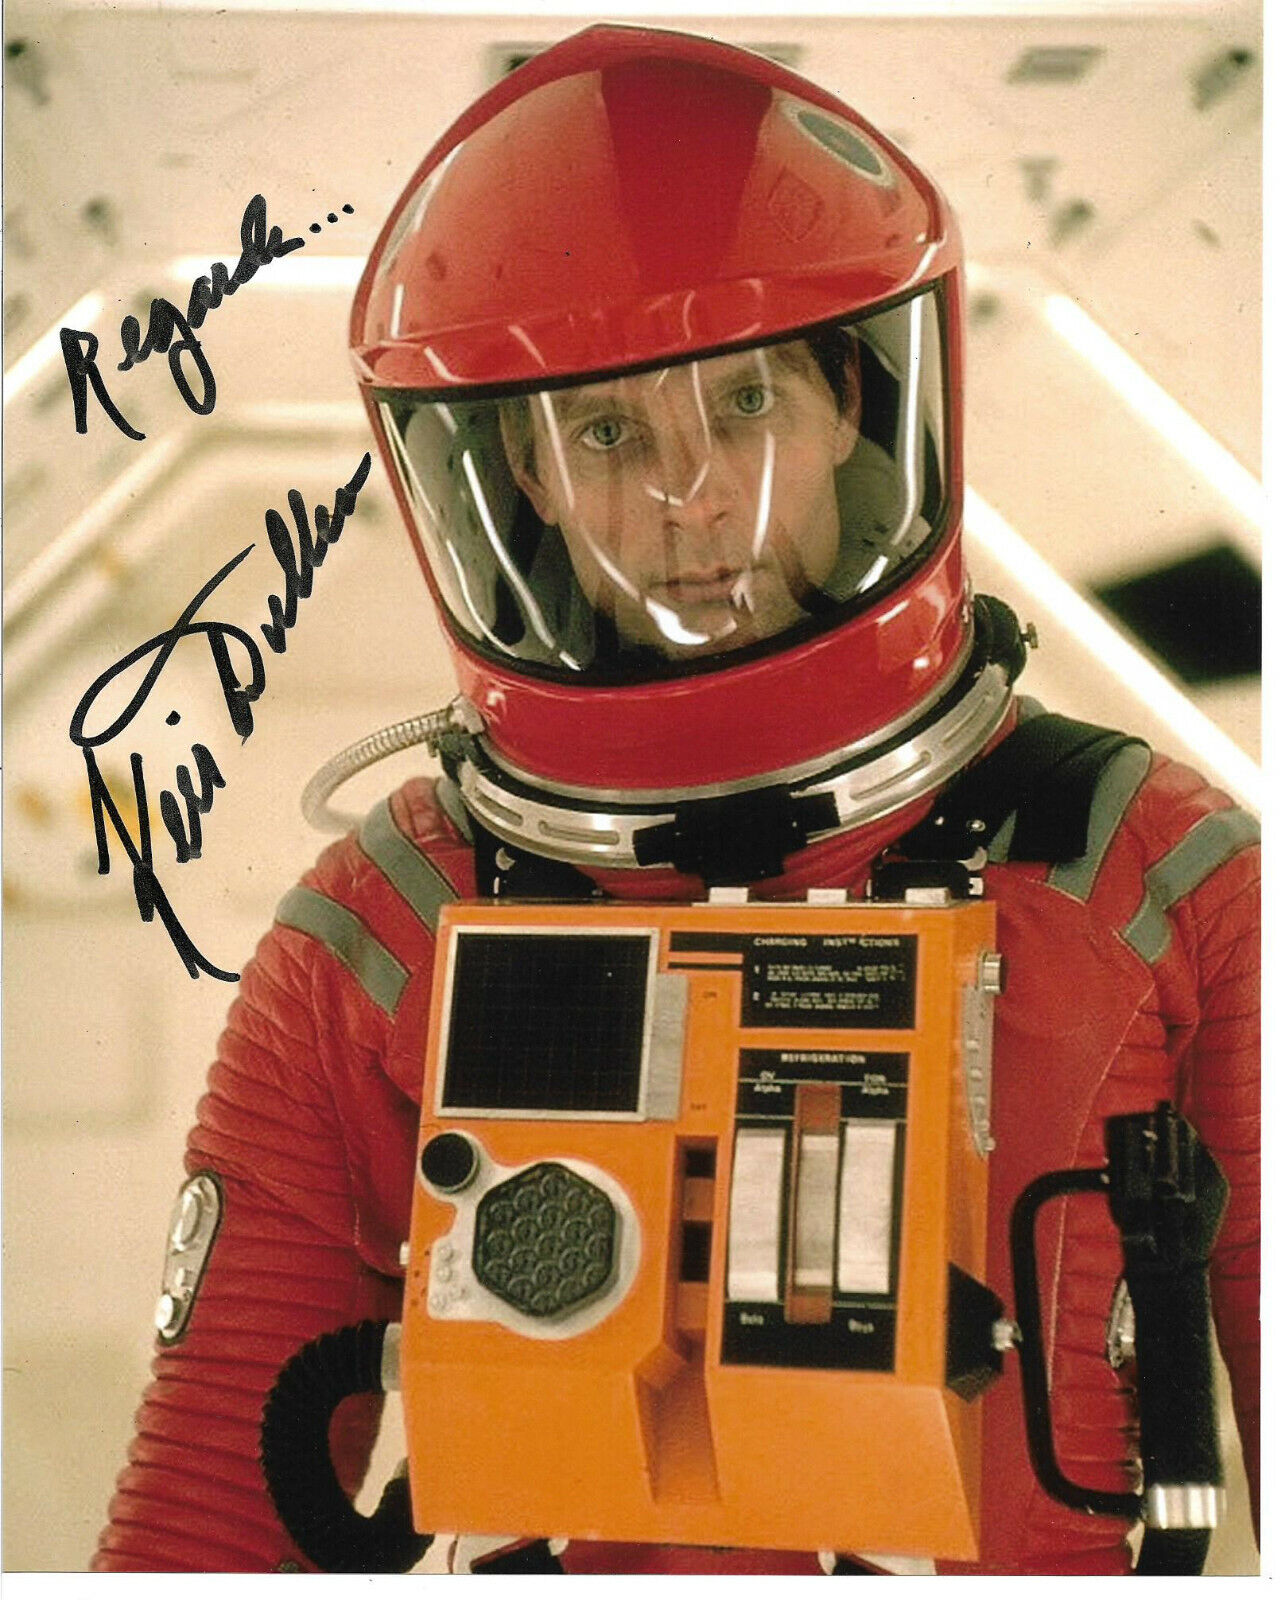 Keir Dullea Signed 8x10 Photo Poster painting Autograph, 2001: A Space Odyssey, David Bowman